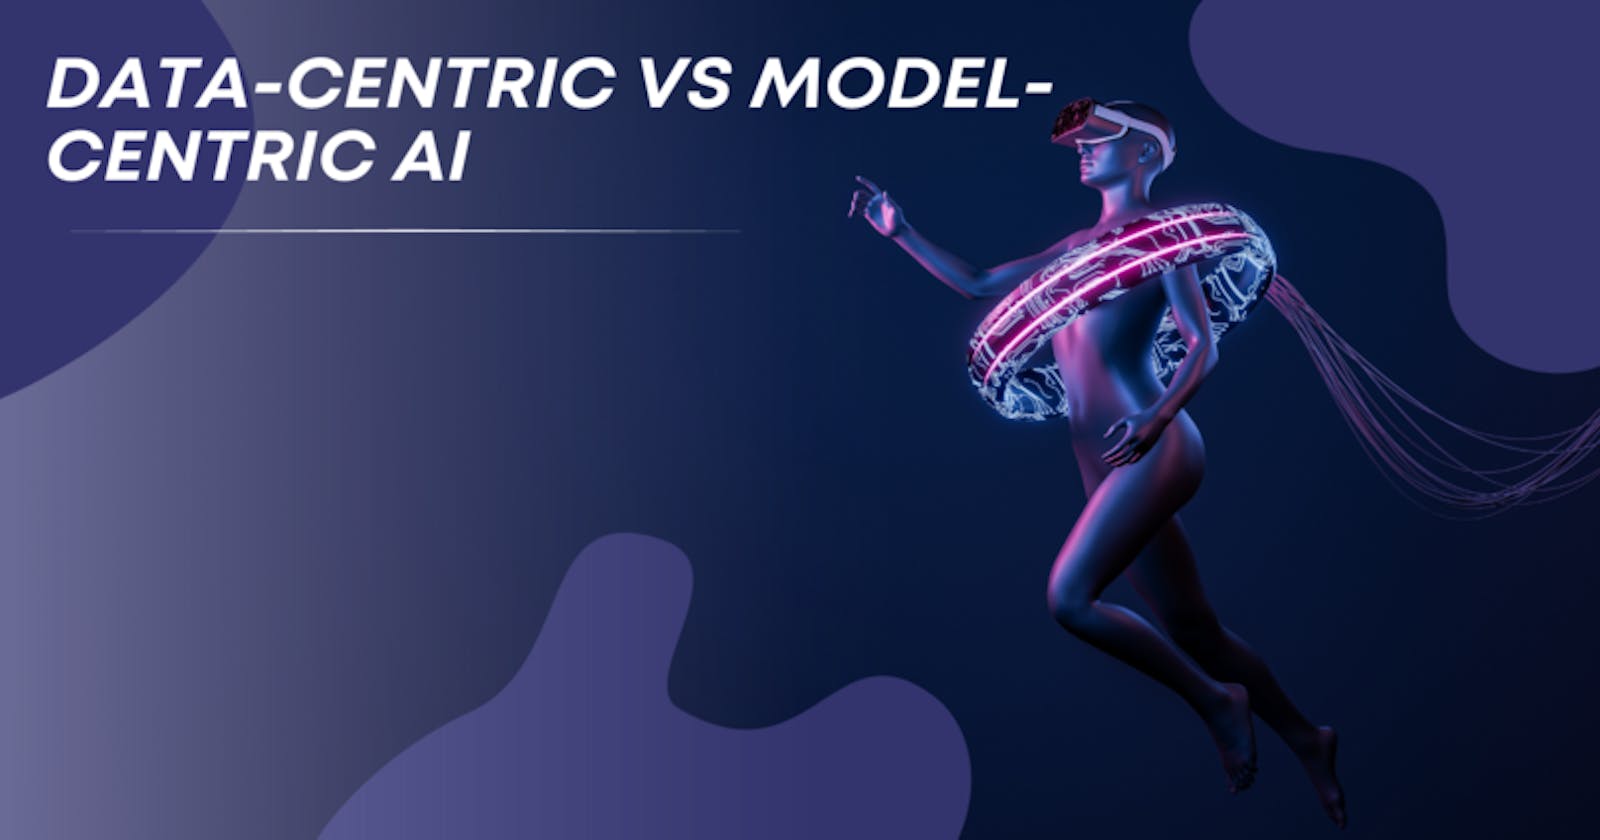 Data and Analytics Solutions - Data-Centric versus Model-Centric AI